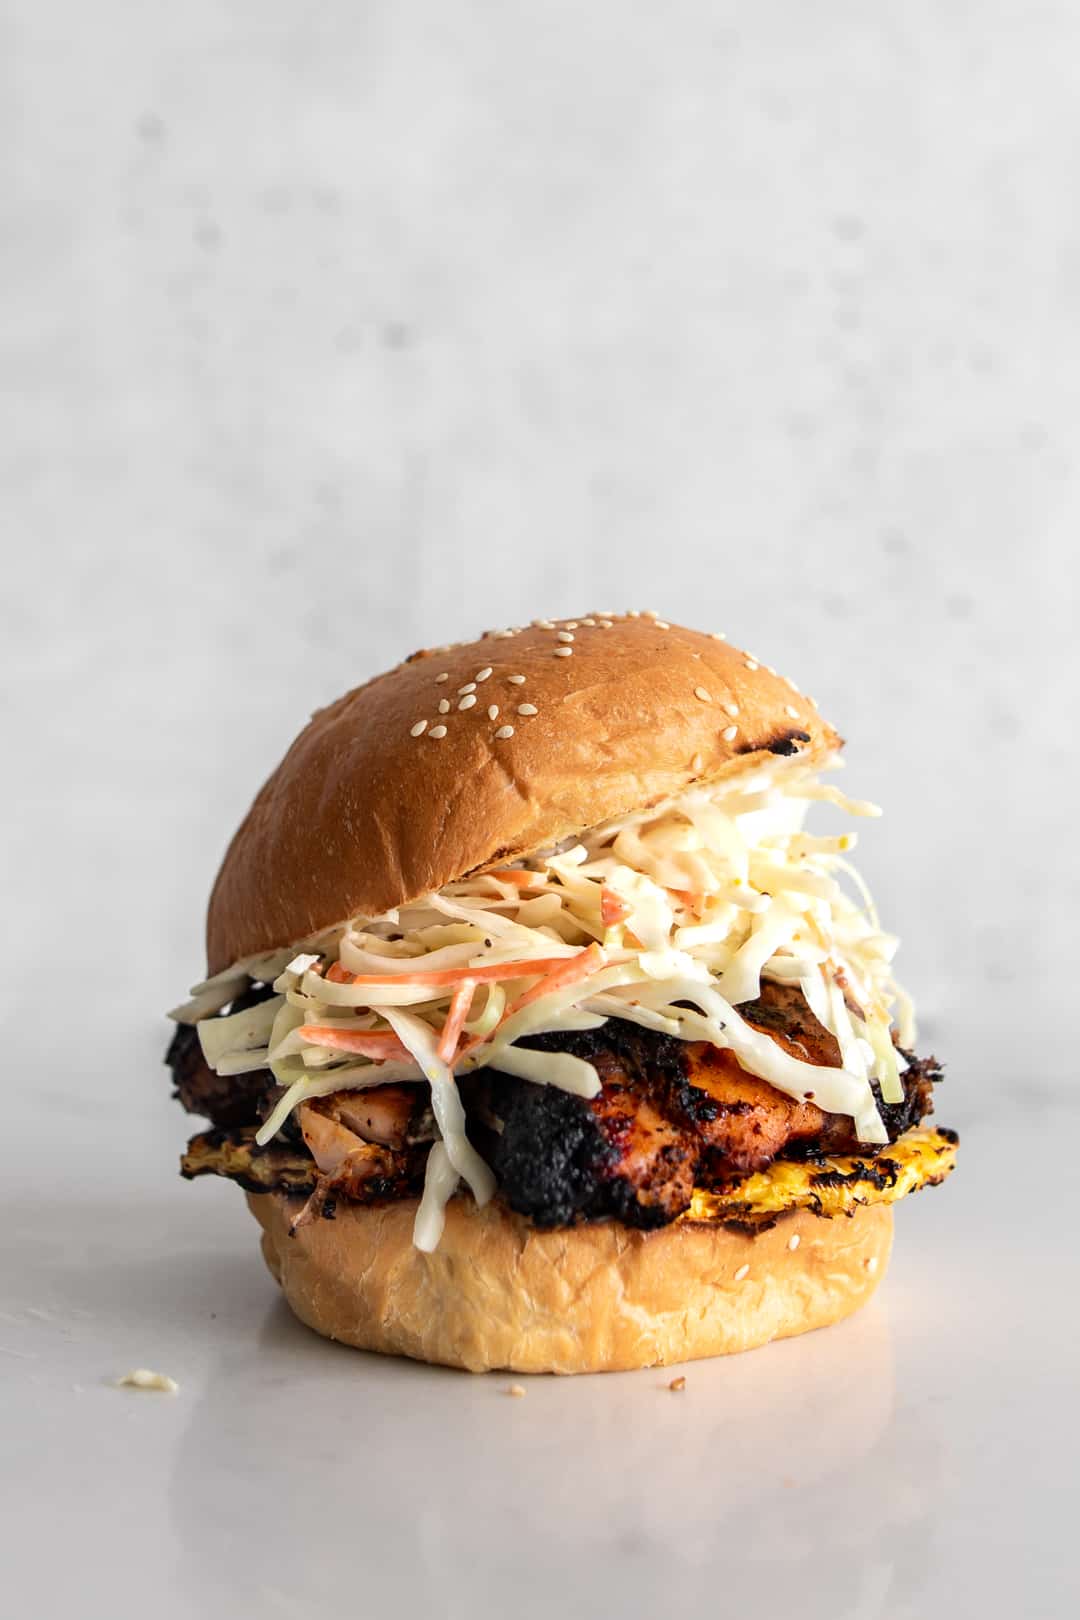 Closeup of bbq jerk chicken with grilled pineapple and simple coleslaw on a sesame seed bun